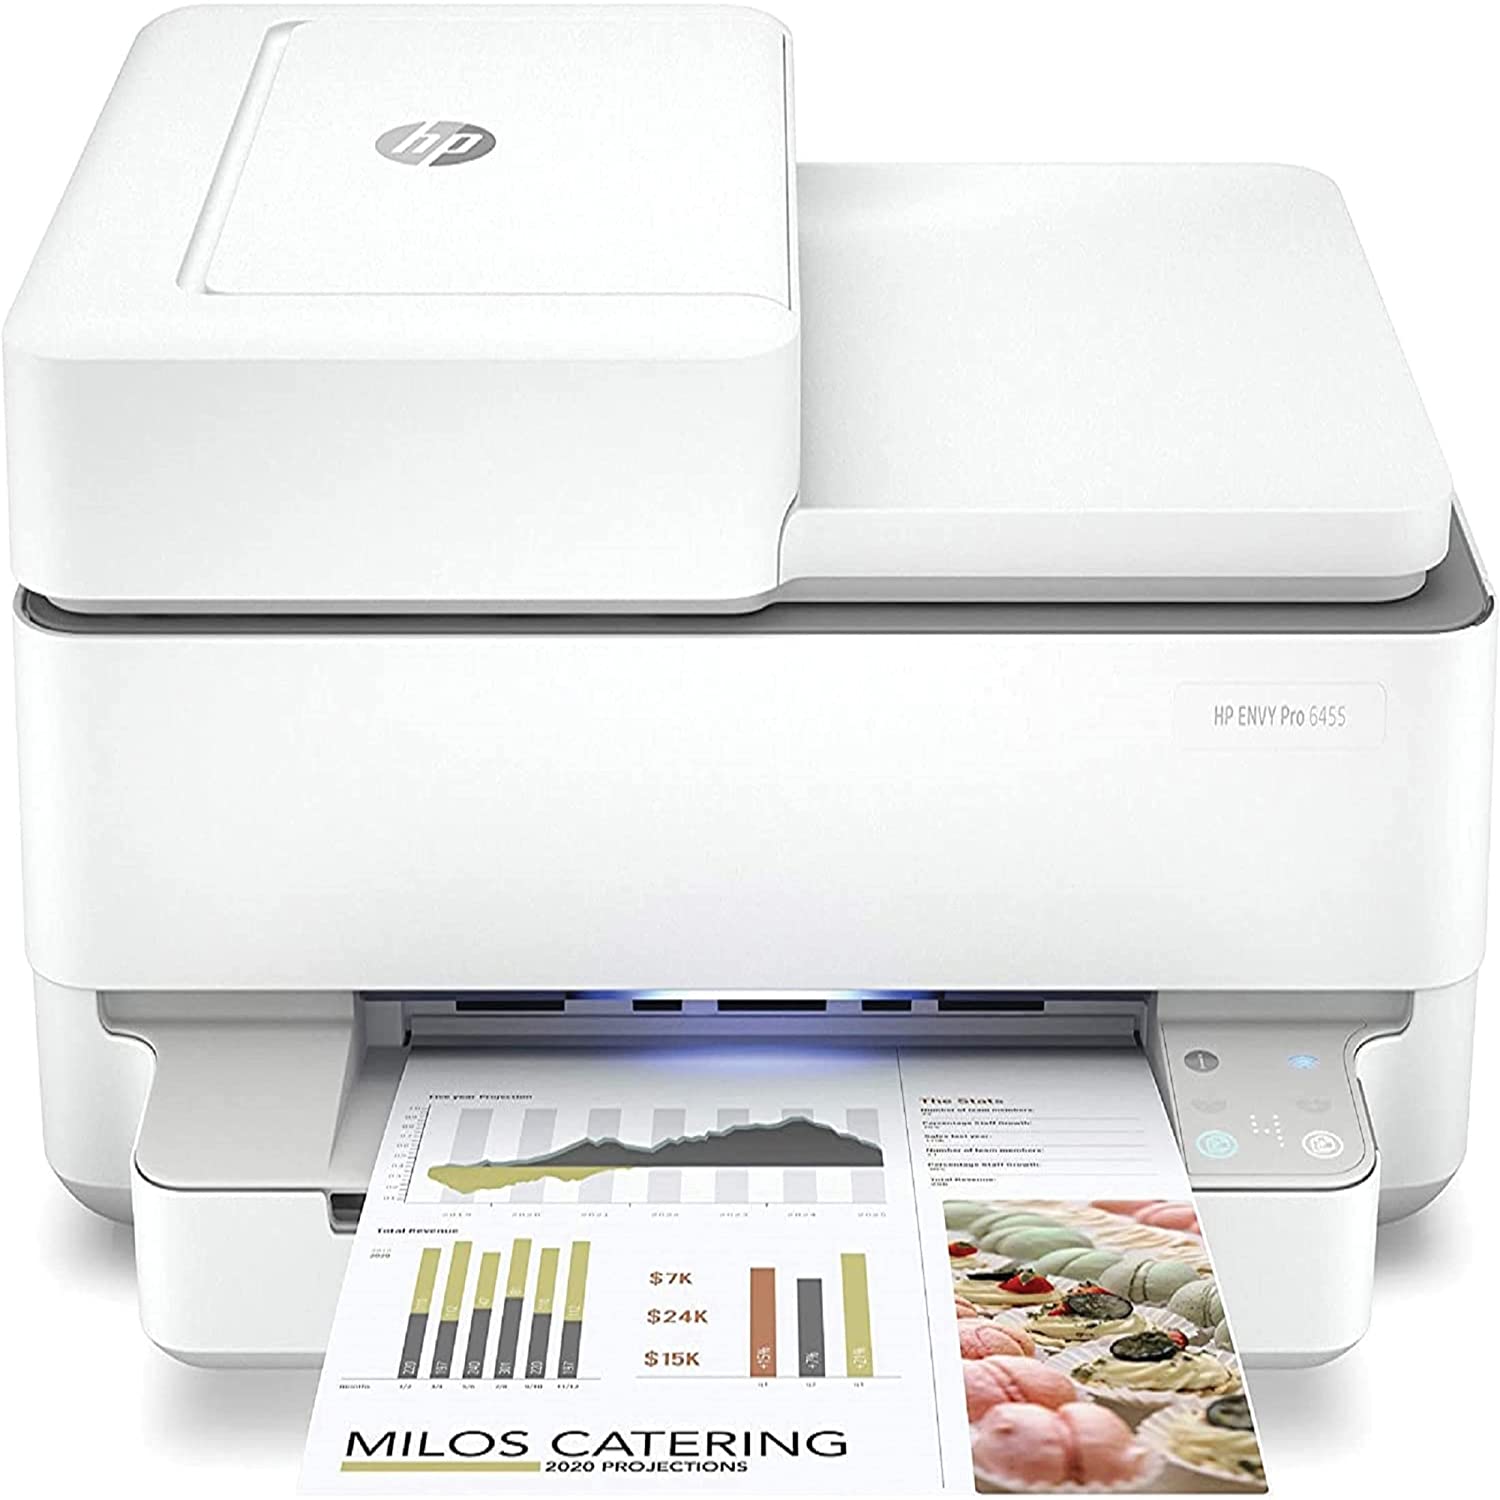 Best Printers To Buy For Your Mac Ios Hacker